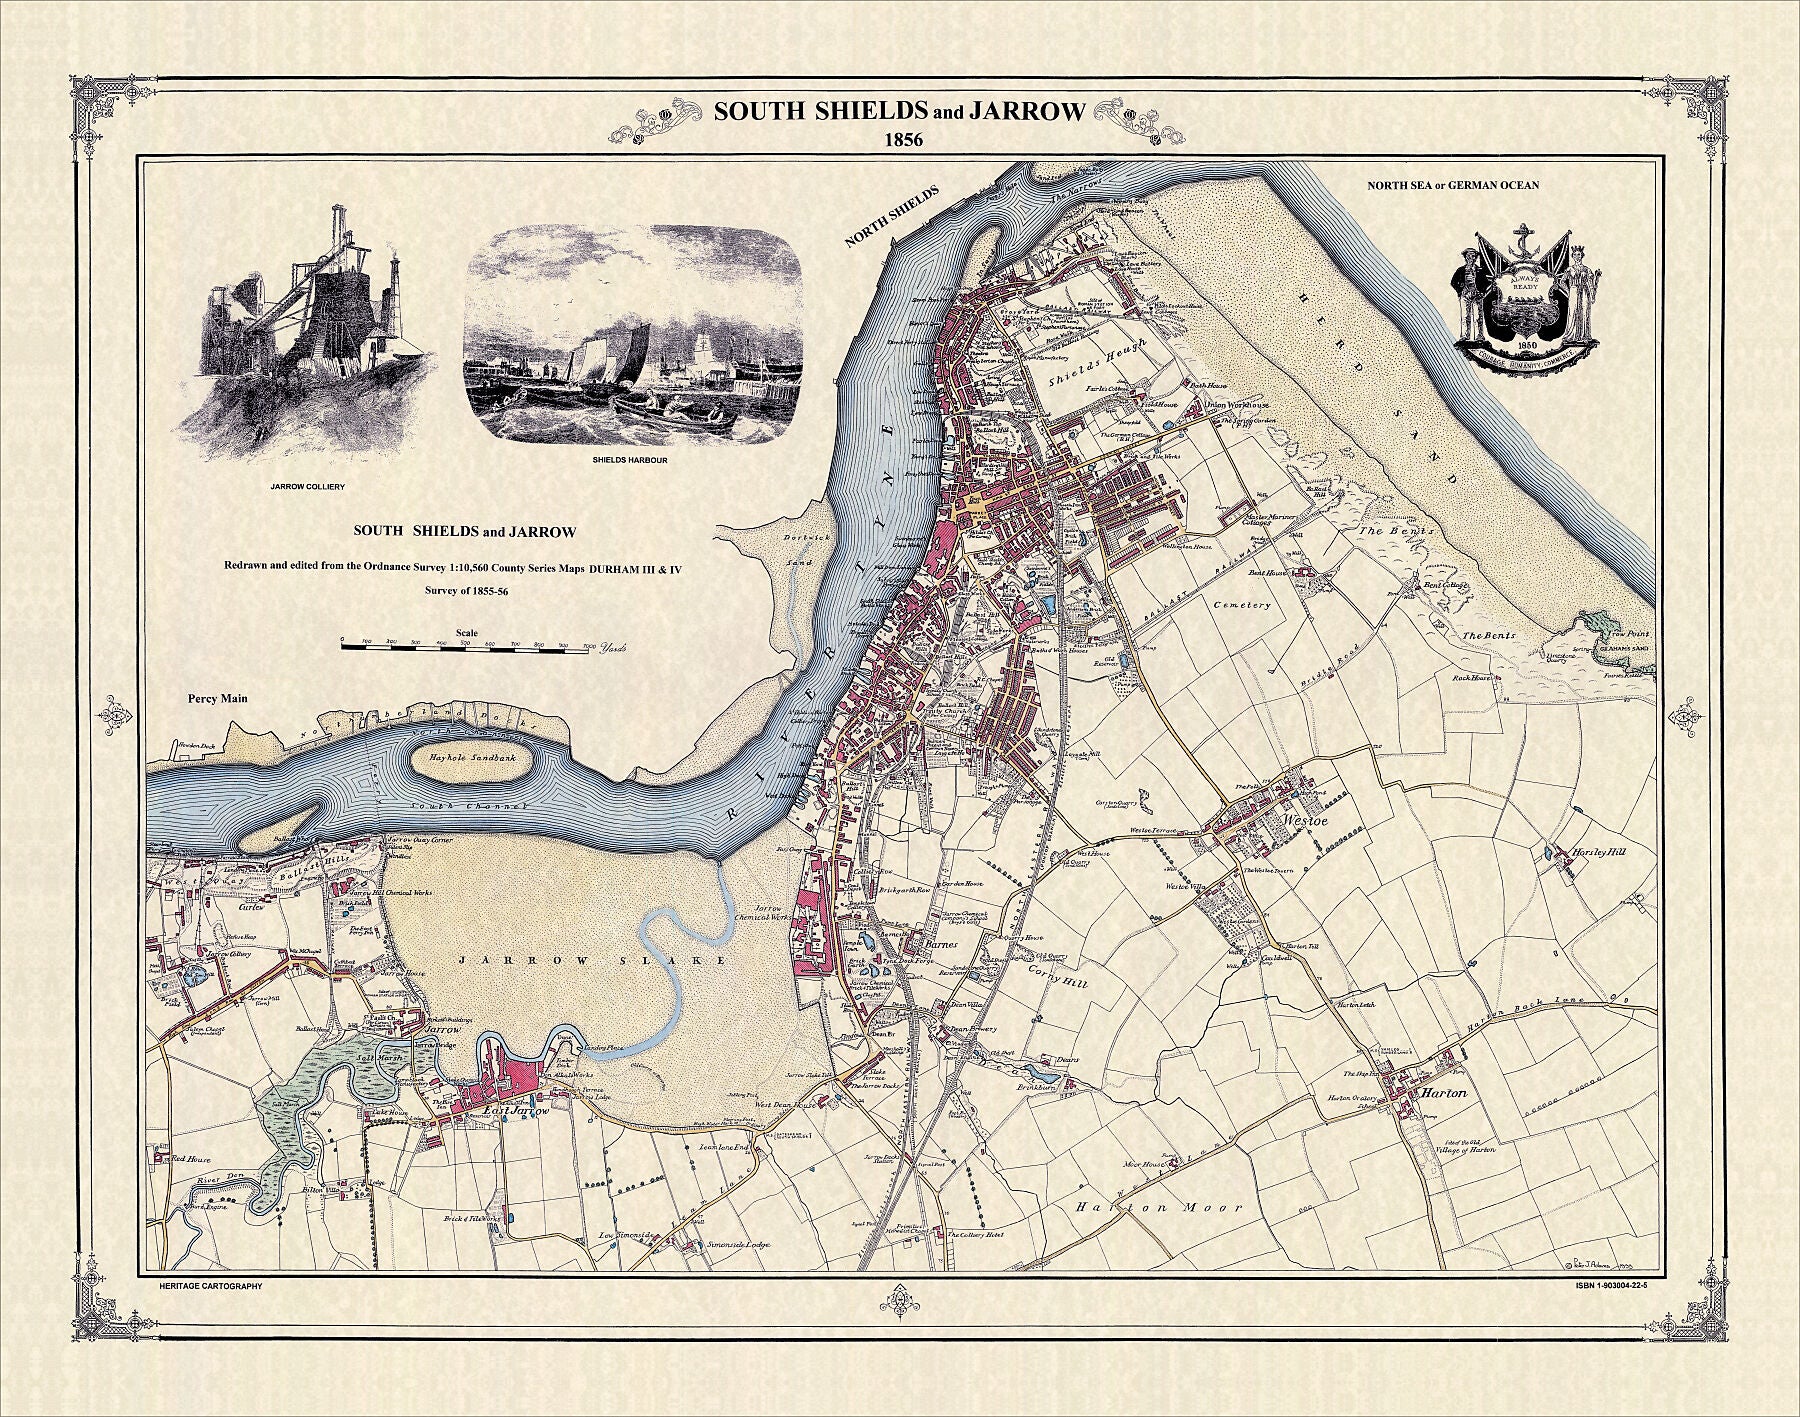 Coloured Victorian map of South Shields and Jarrow in 1856 by Peter J Adams of Heritage Cartography